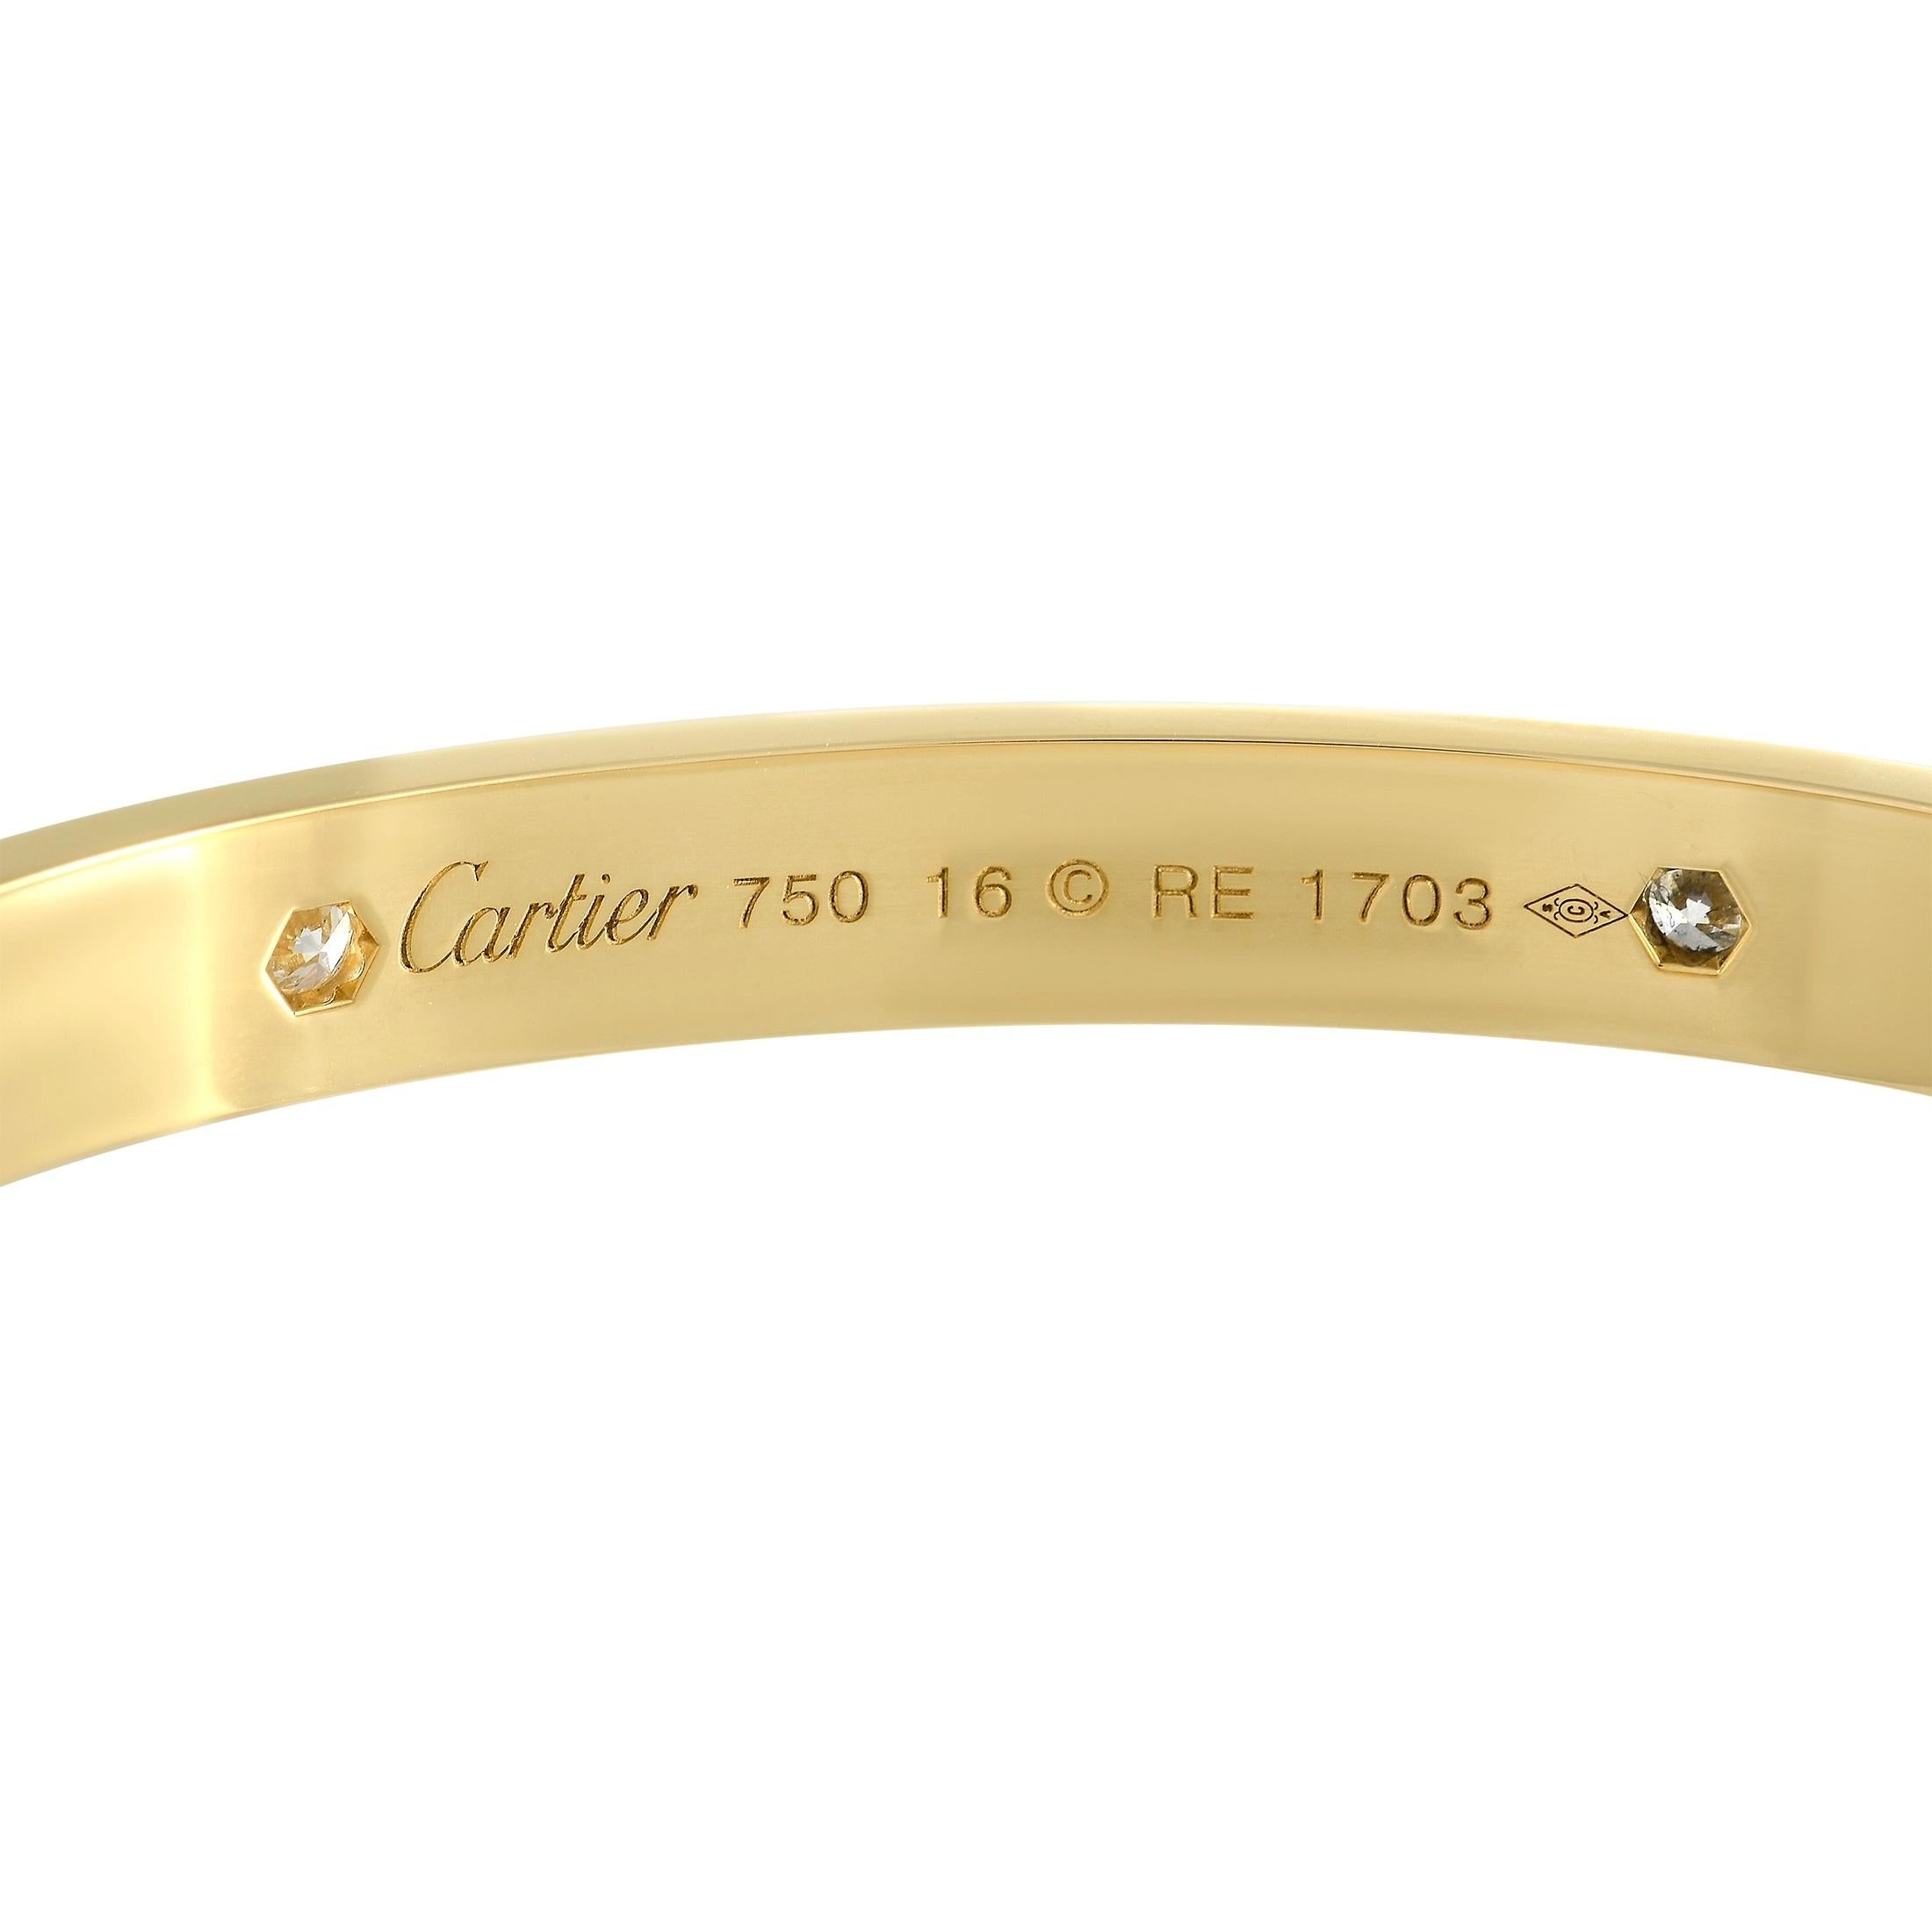 This iconic piece from the Cartier Love collection exudes obvious elegance and sophistication. Although sleek and simple in design, this 18K Yellow Gold bangle comes to life thanks to the signature screw accents and the presence of 4 inset round-cut